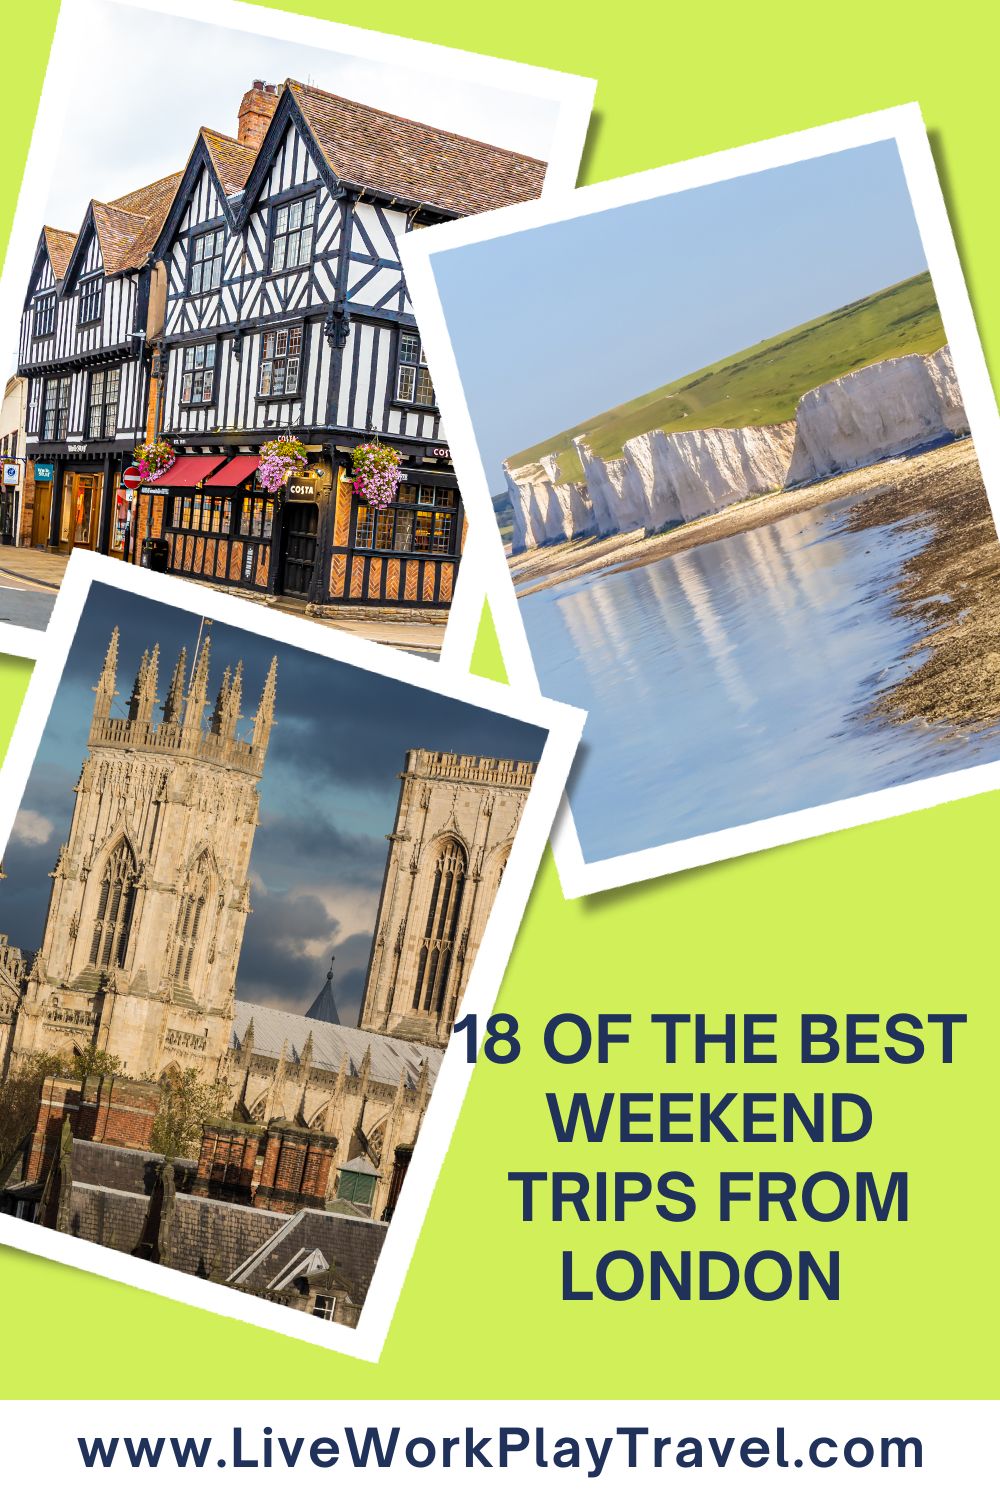 Castles, beaches and old Tudor style buildings are some of the things to see on a Weekend trip from London.